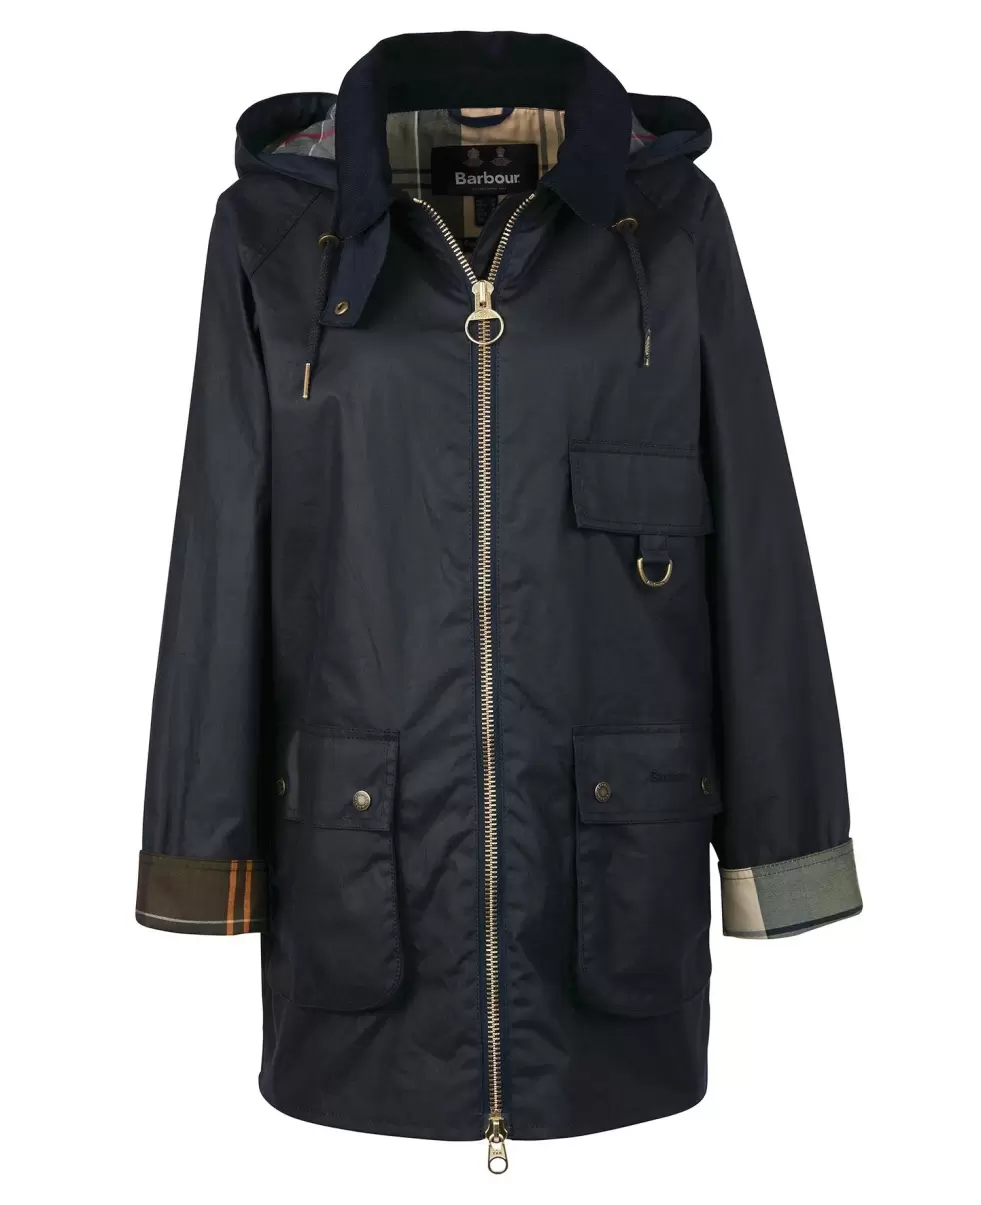 Proven Navy Waxed Jackets Barbour Highclere Wax Jacket Women - 1